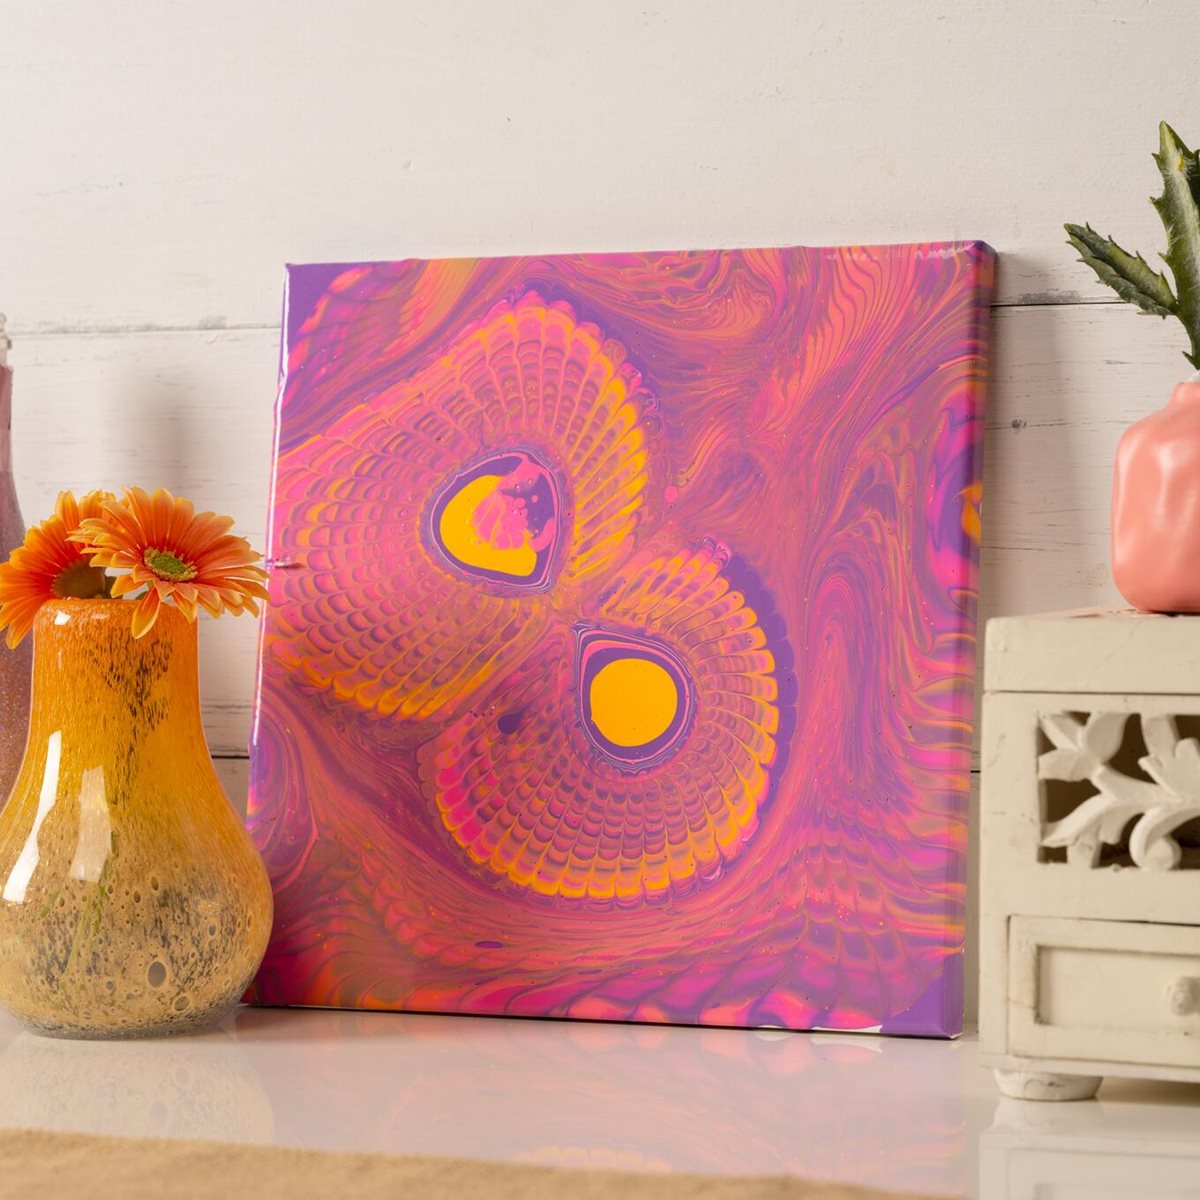 Strained Waves of Pink, Orange, and Purple Canvas